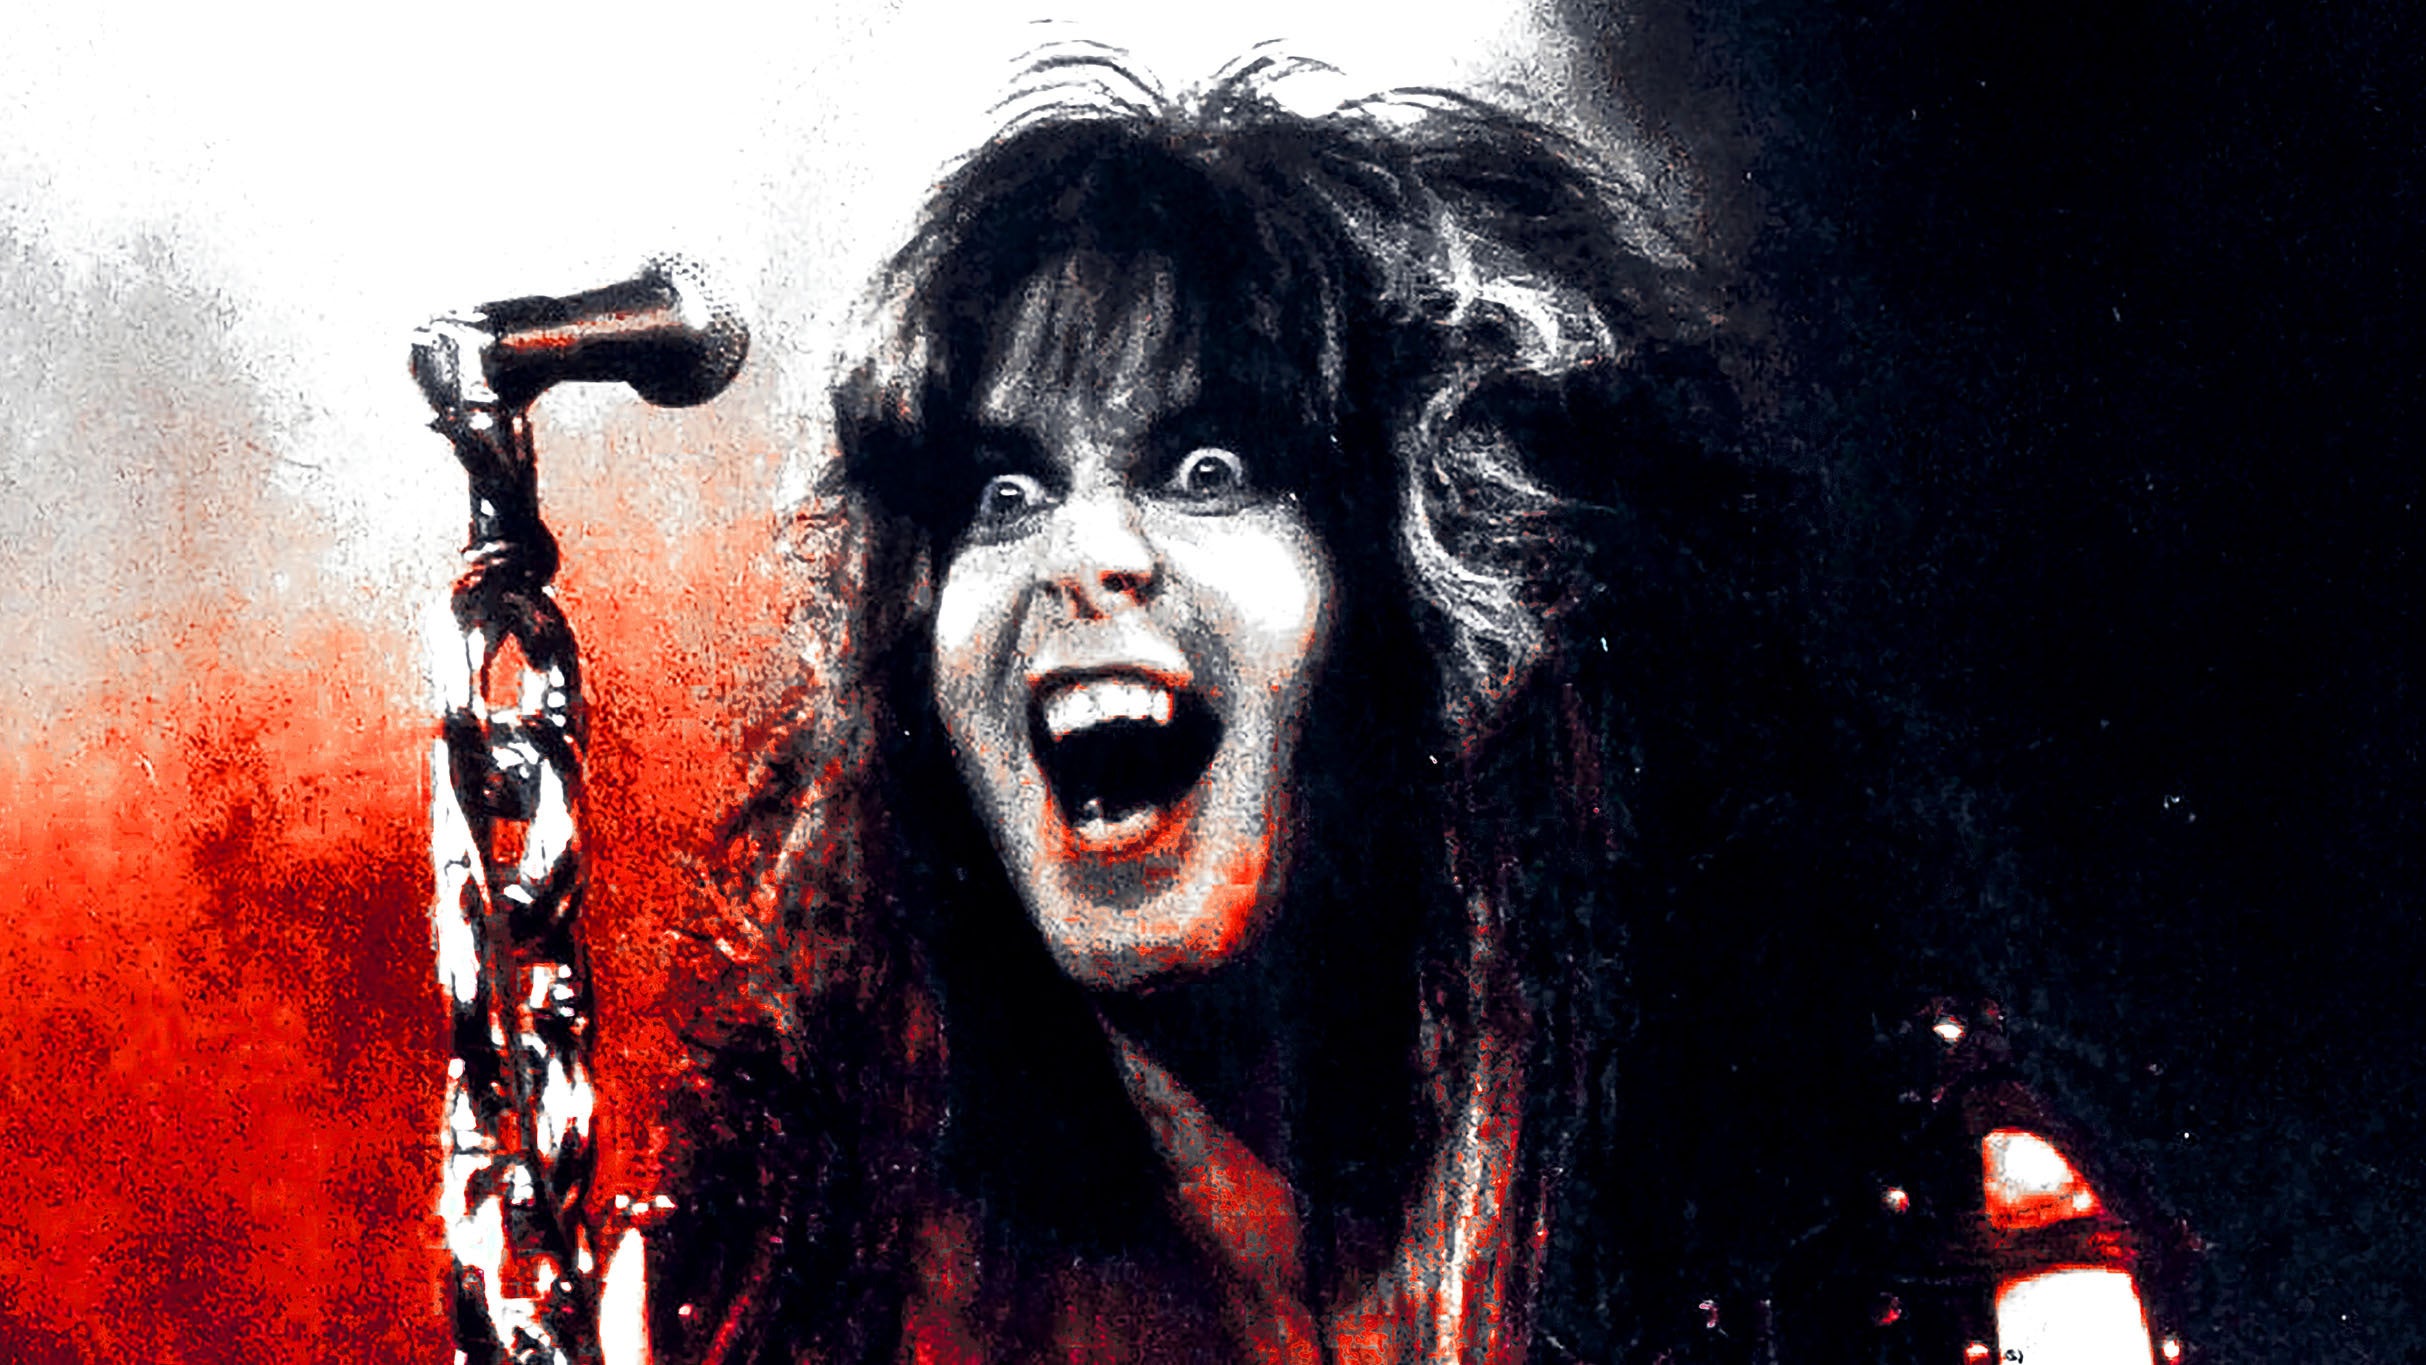 W.A.S.P. Album One Alive World Tour '24 presale code for real tickets in Boston